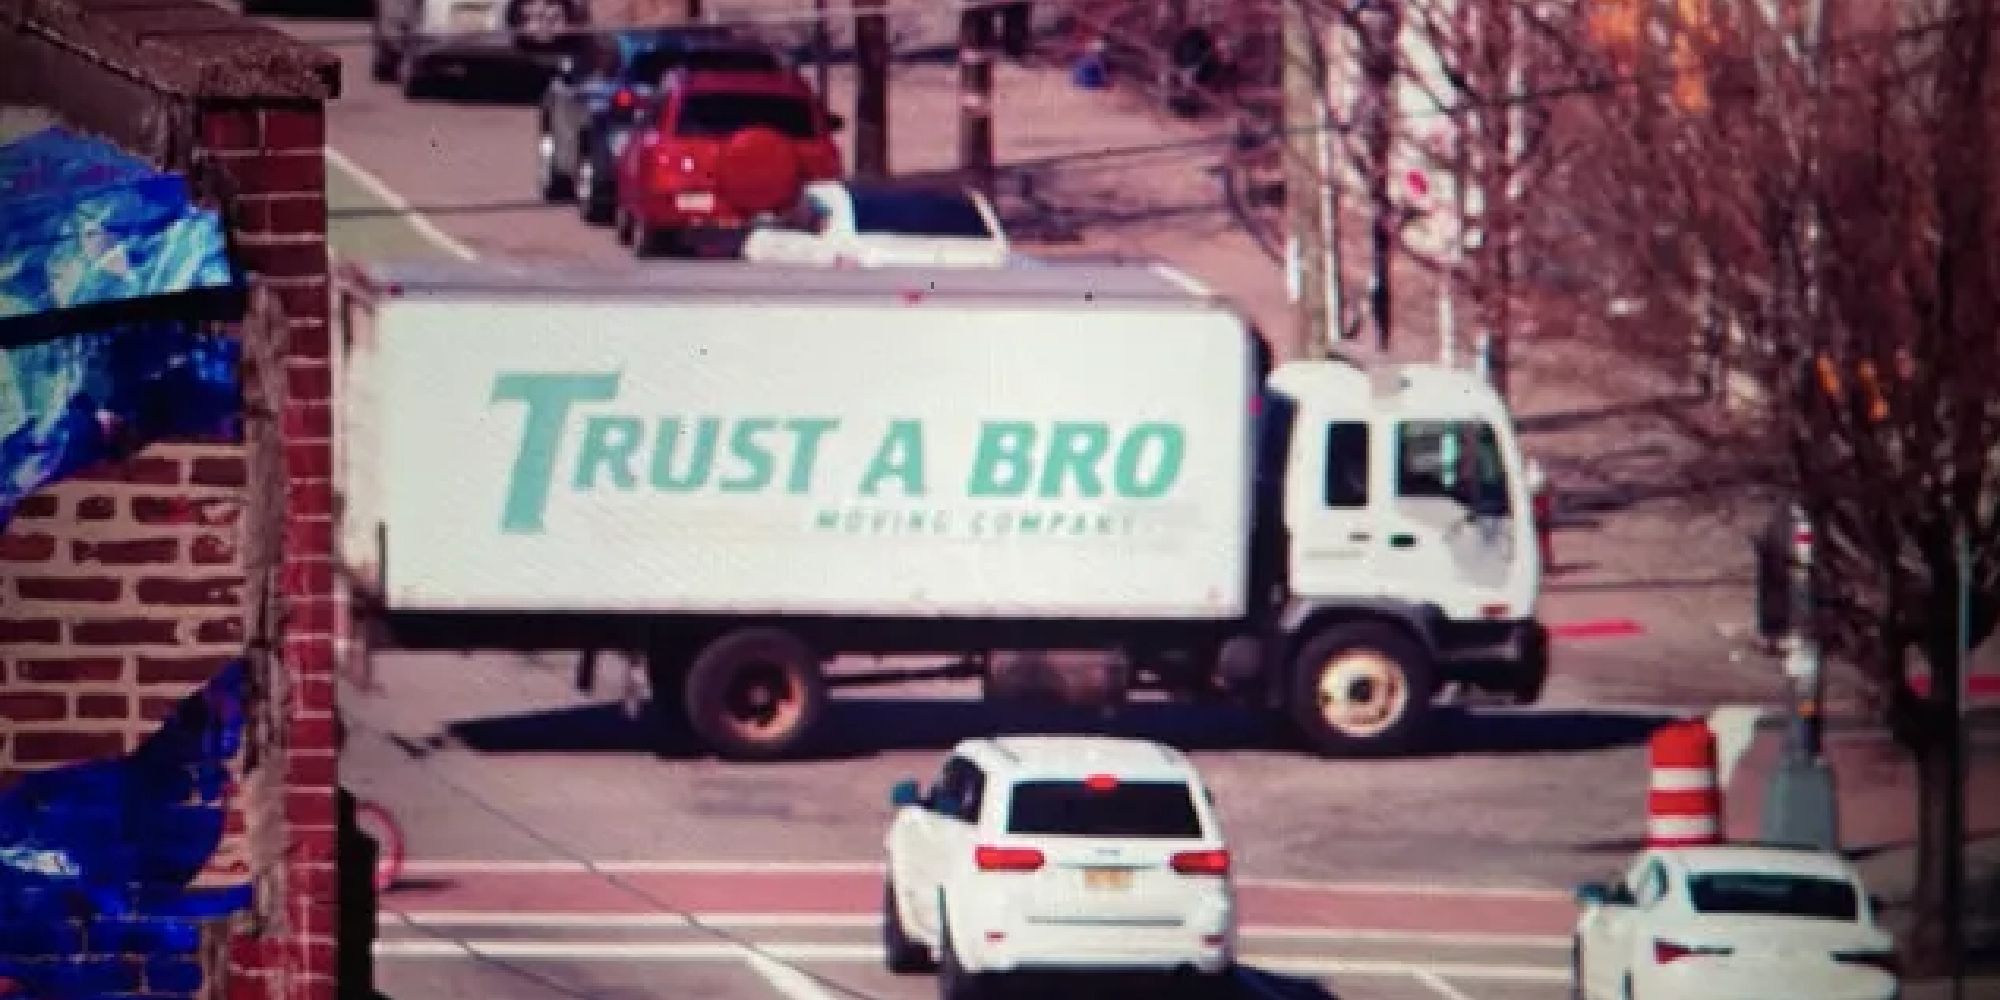 A Trust a Bro moving van appearing in the end credits of Ms. Marvel